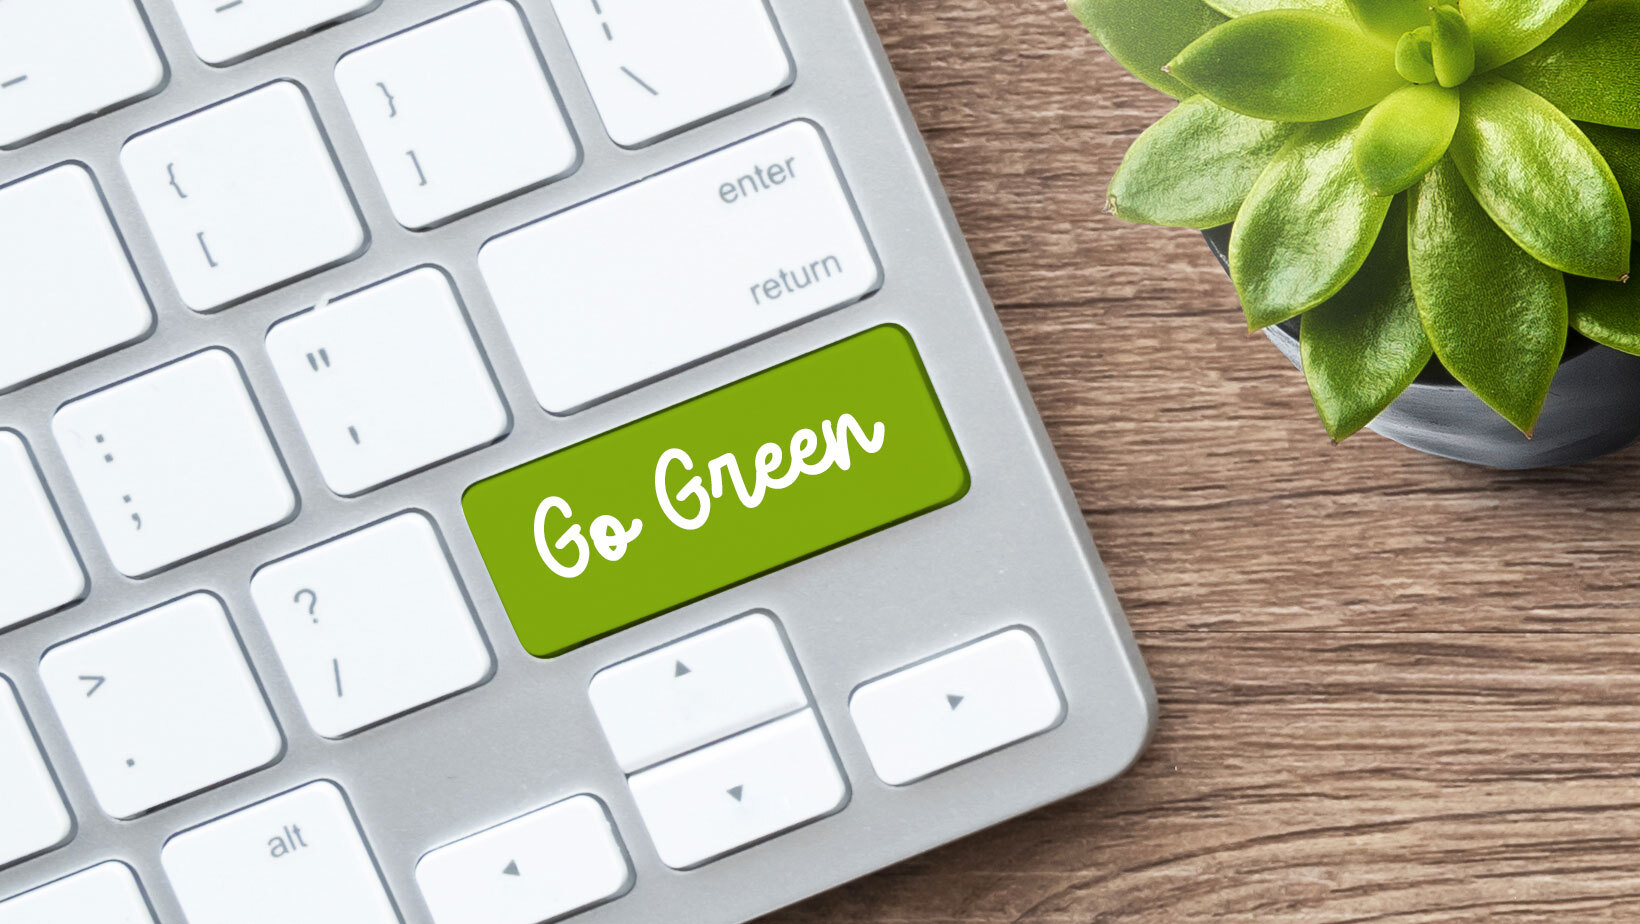 Keyboard with a green key that reads "Go Green"